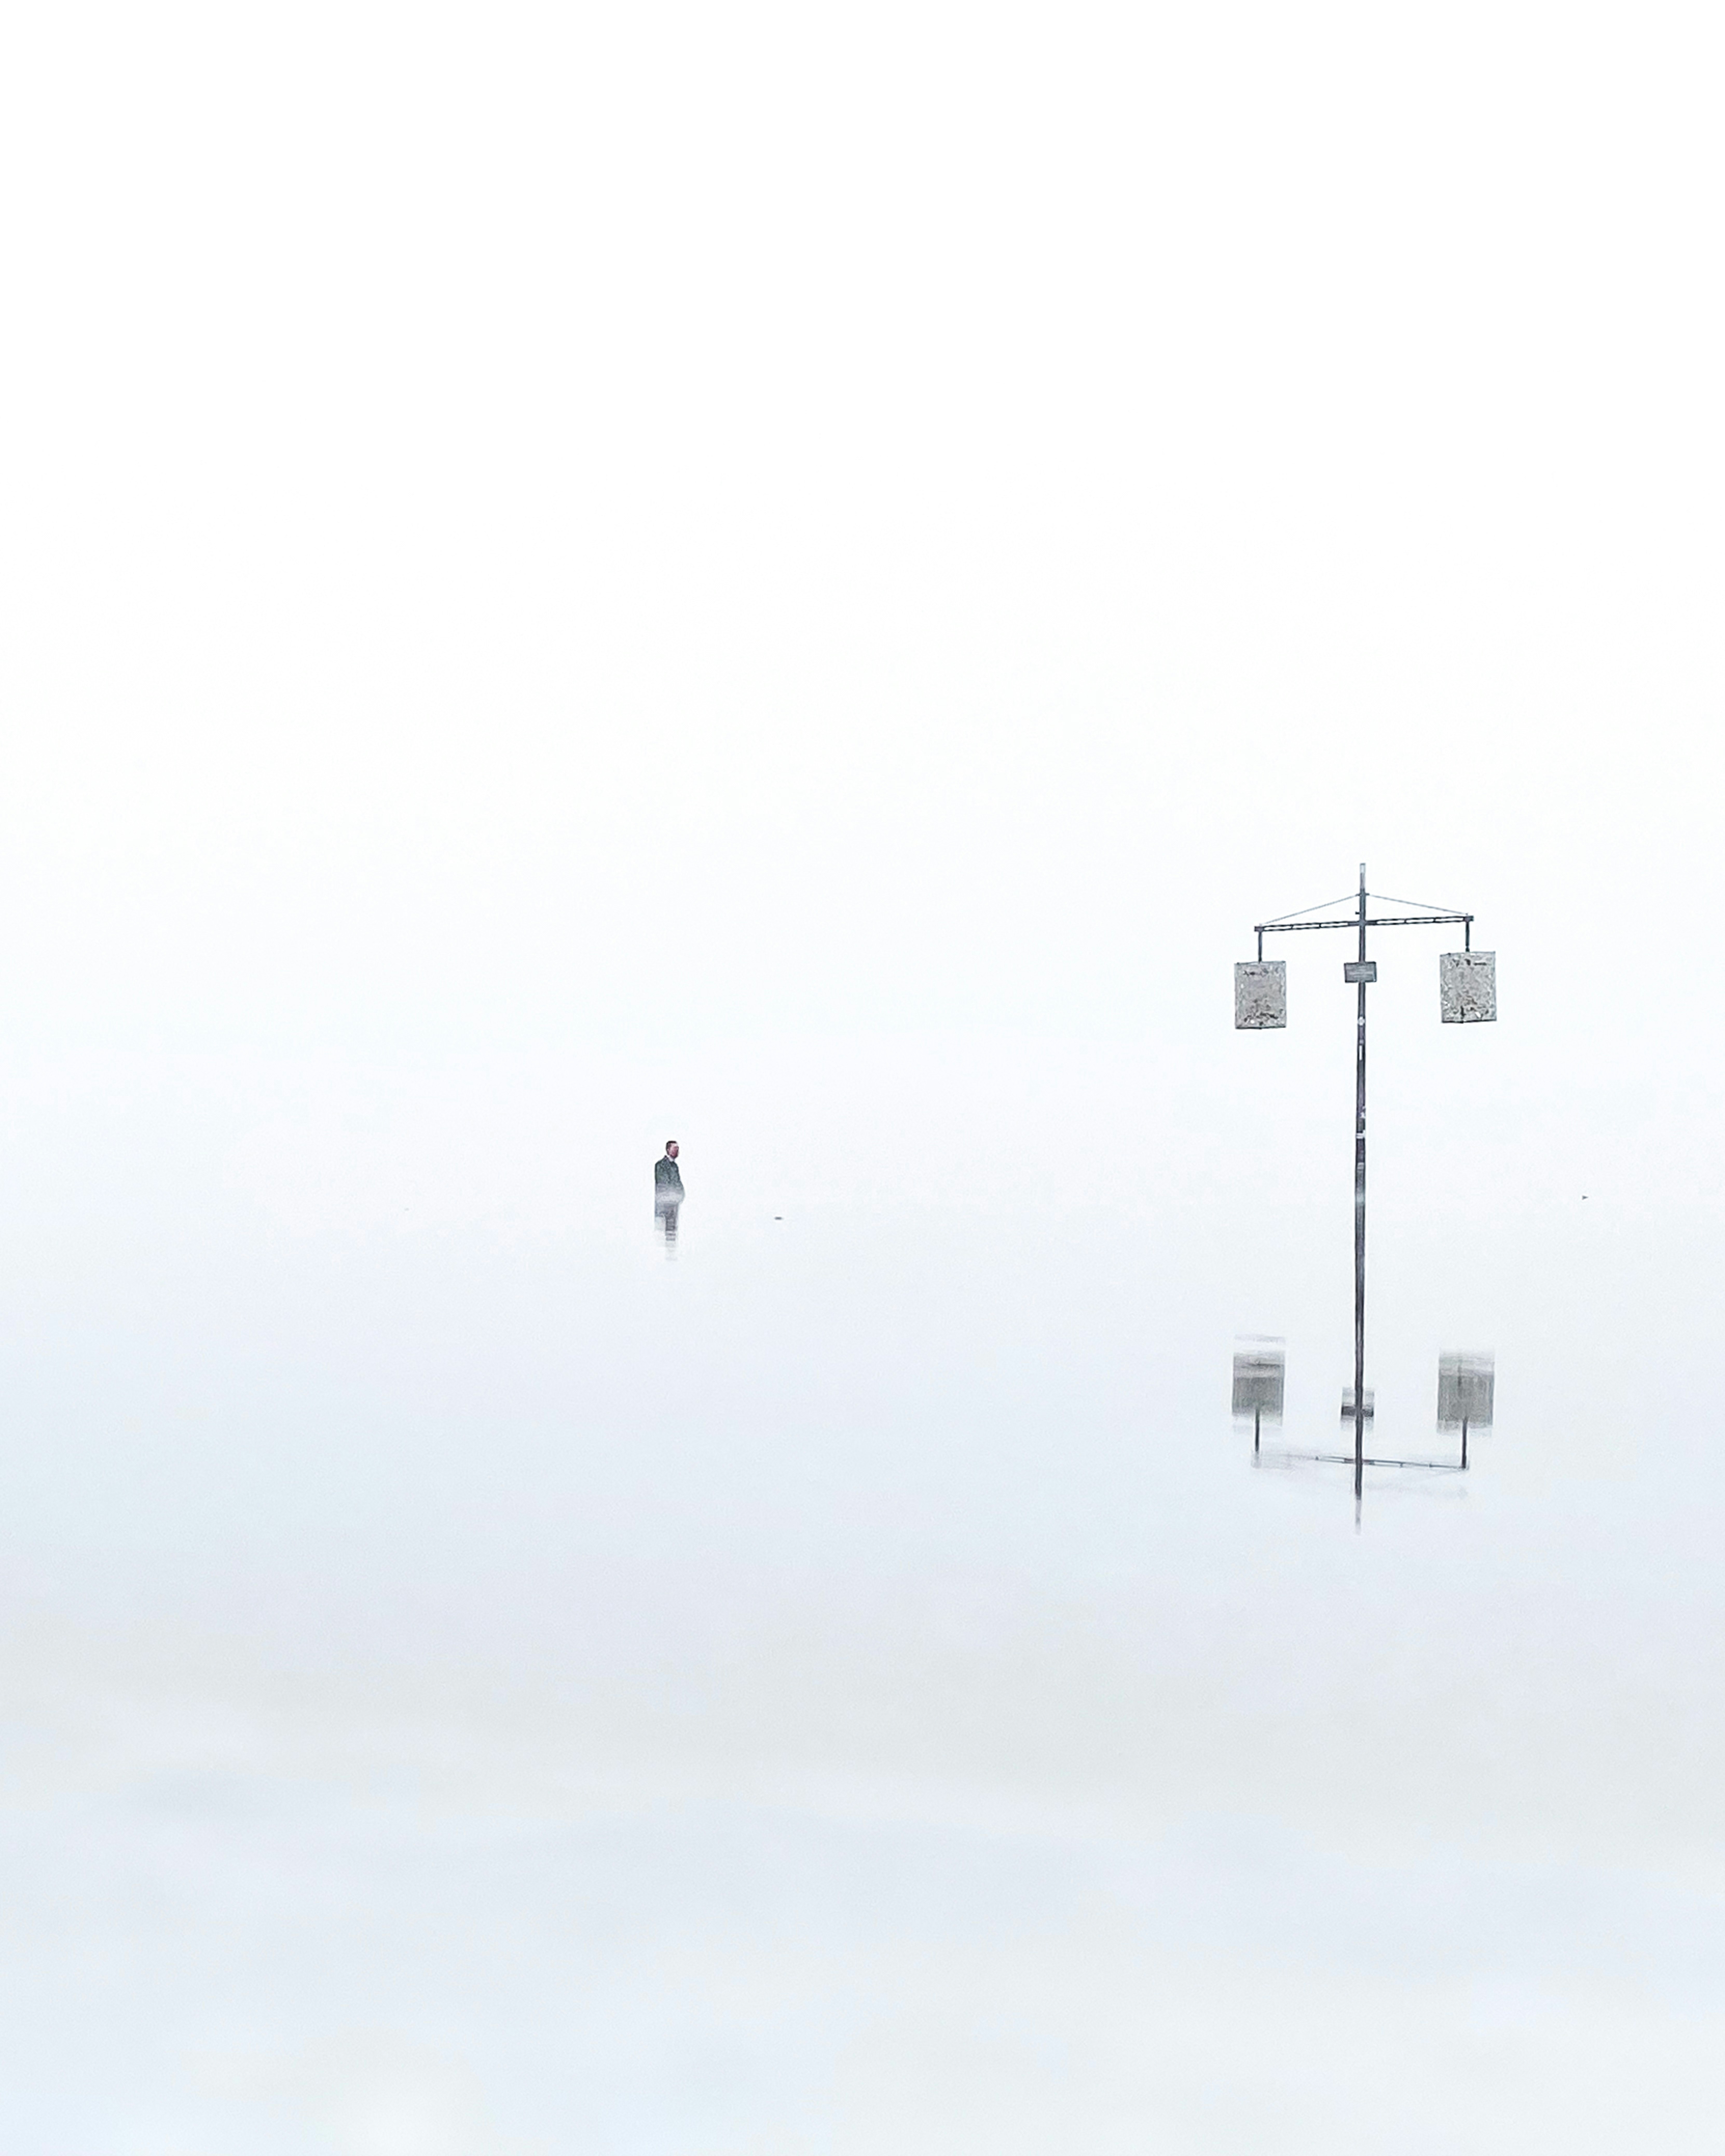 lonely, fog, mist, loneliness, mystery, memories, memoire, rêve, flou, blur, Bordeaux, France, silhouette, dreams, minimal, minimalist, white, blurry, mind, thinking, suit, man, suitup, morning, foggy, oniric, dreamy, sadness, sad, paradise, white, city, early, atmosphere, fiction, science-fiction,